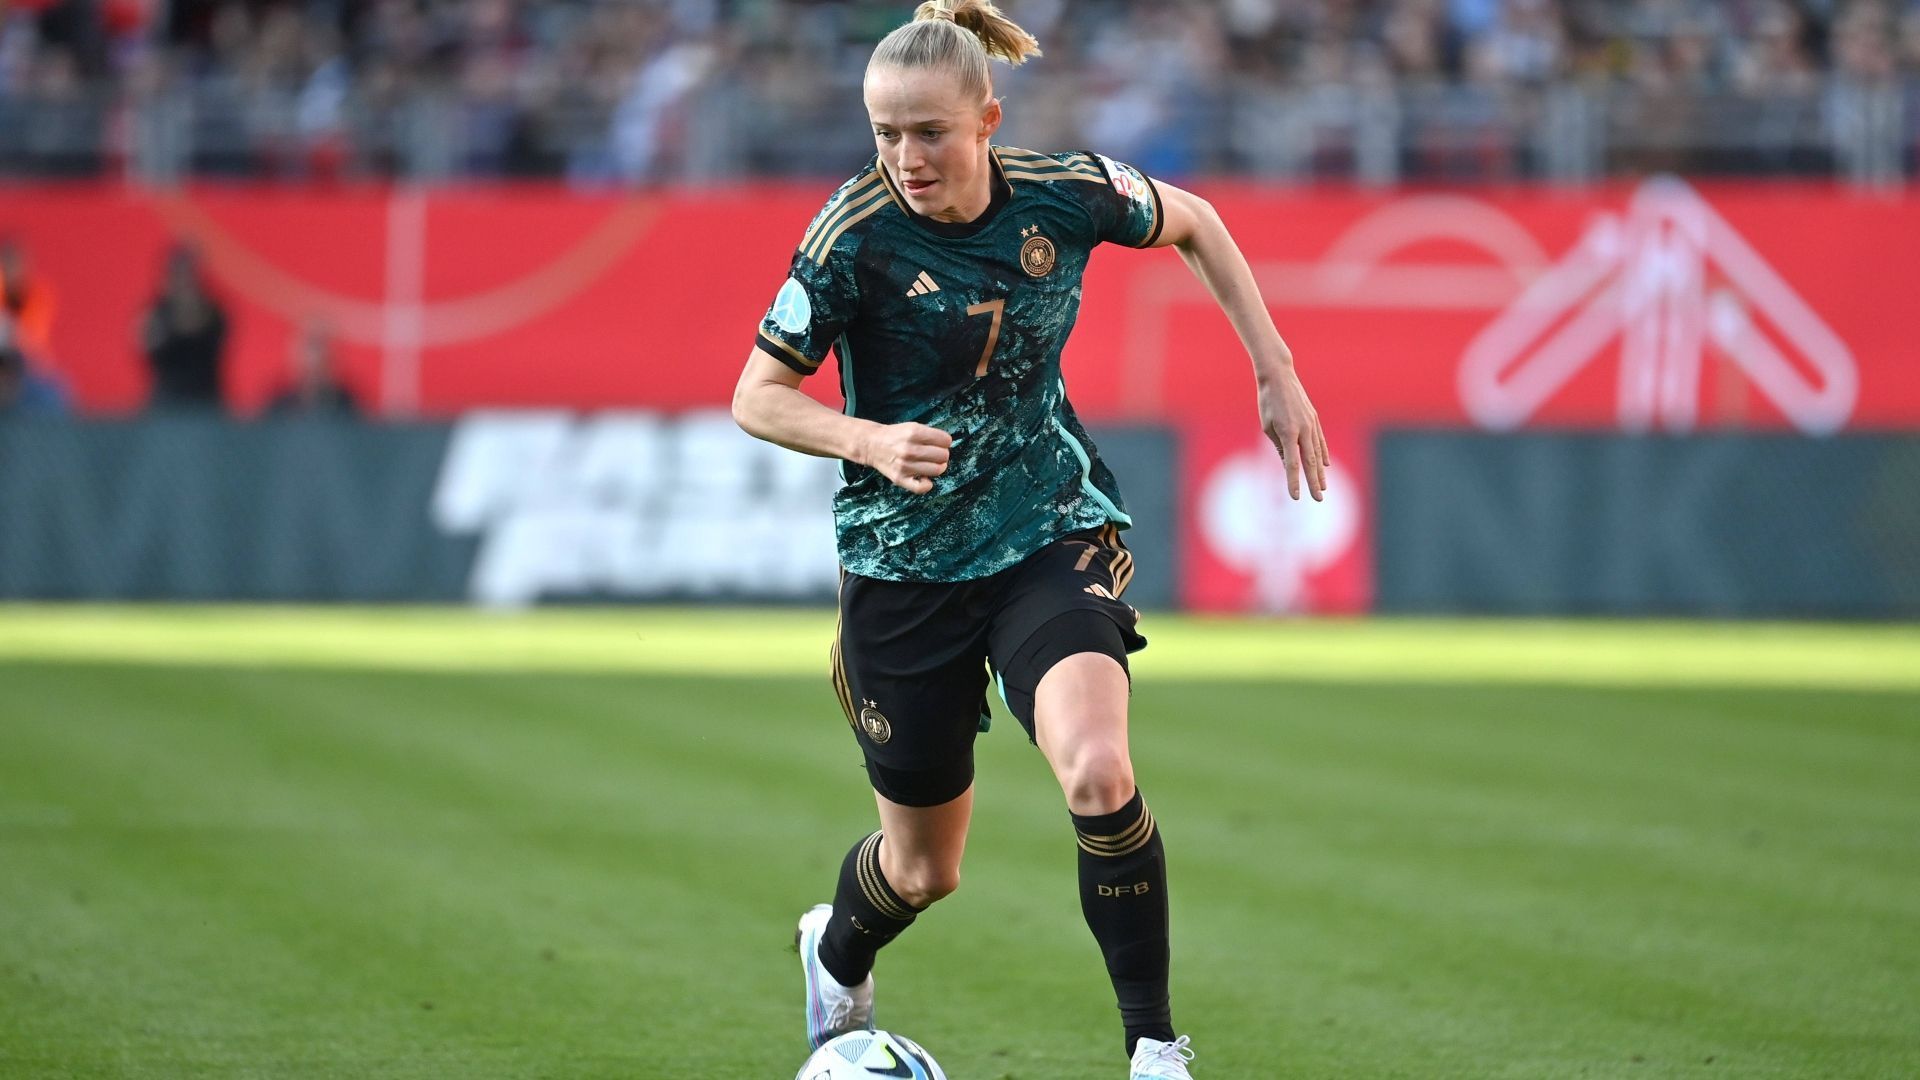 
                <strong>Lea Schüller</strong><br>
                &#x2022; <strong>Position: </strong>Mittelfeld/Angriff<br>&#x2022; <strong>Verein: </strong>FC Bayern München<br>&#x2022; <strong>Trikotnummer: </strong><br>&#x2022; <strong>Alter: </strong><br>&#x2022; <strong>Länderspiele: </strong><br>&#x2022; <strong>Länderspiel-Tore: </strong><br>
              